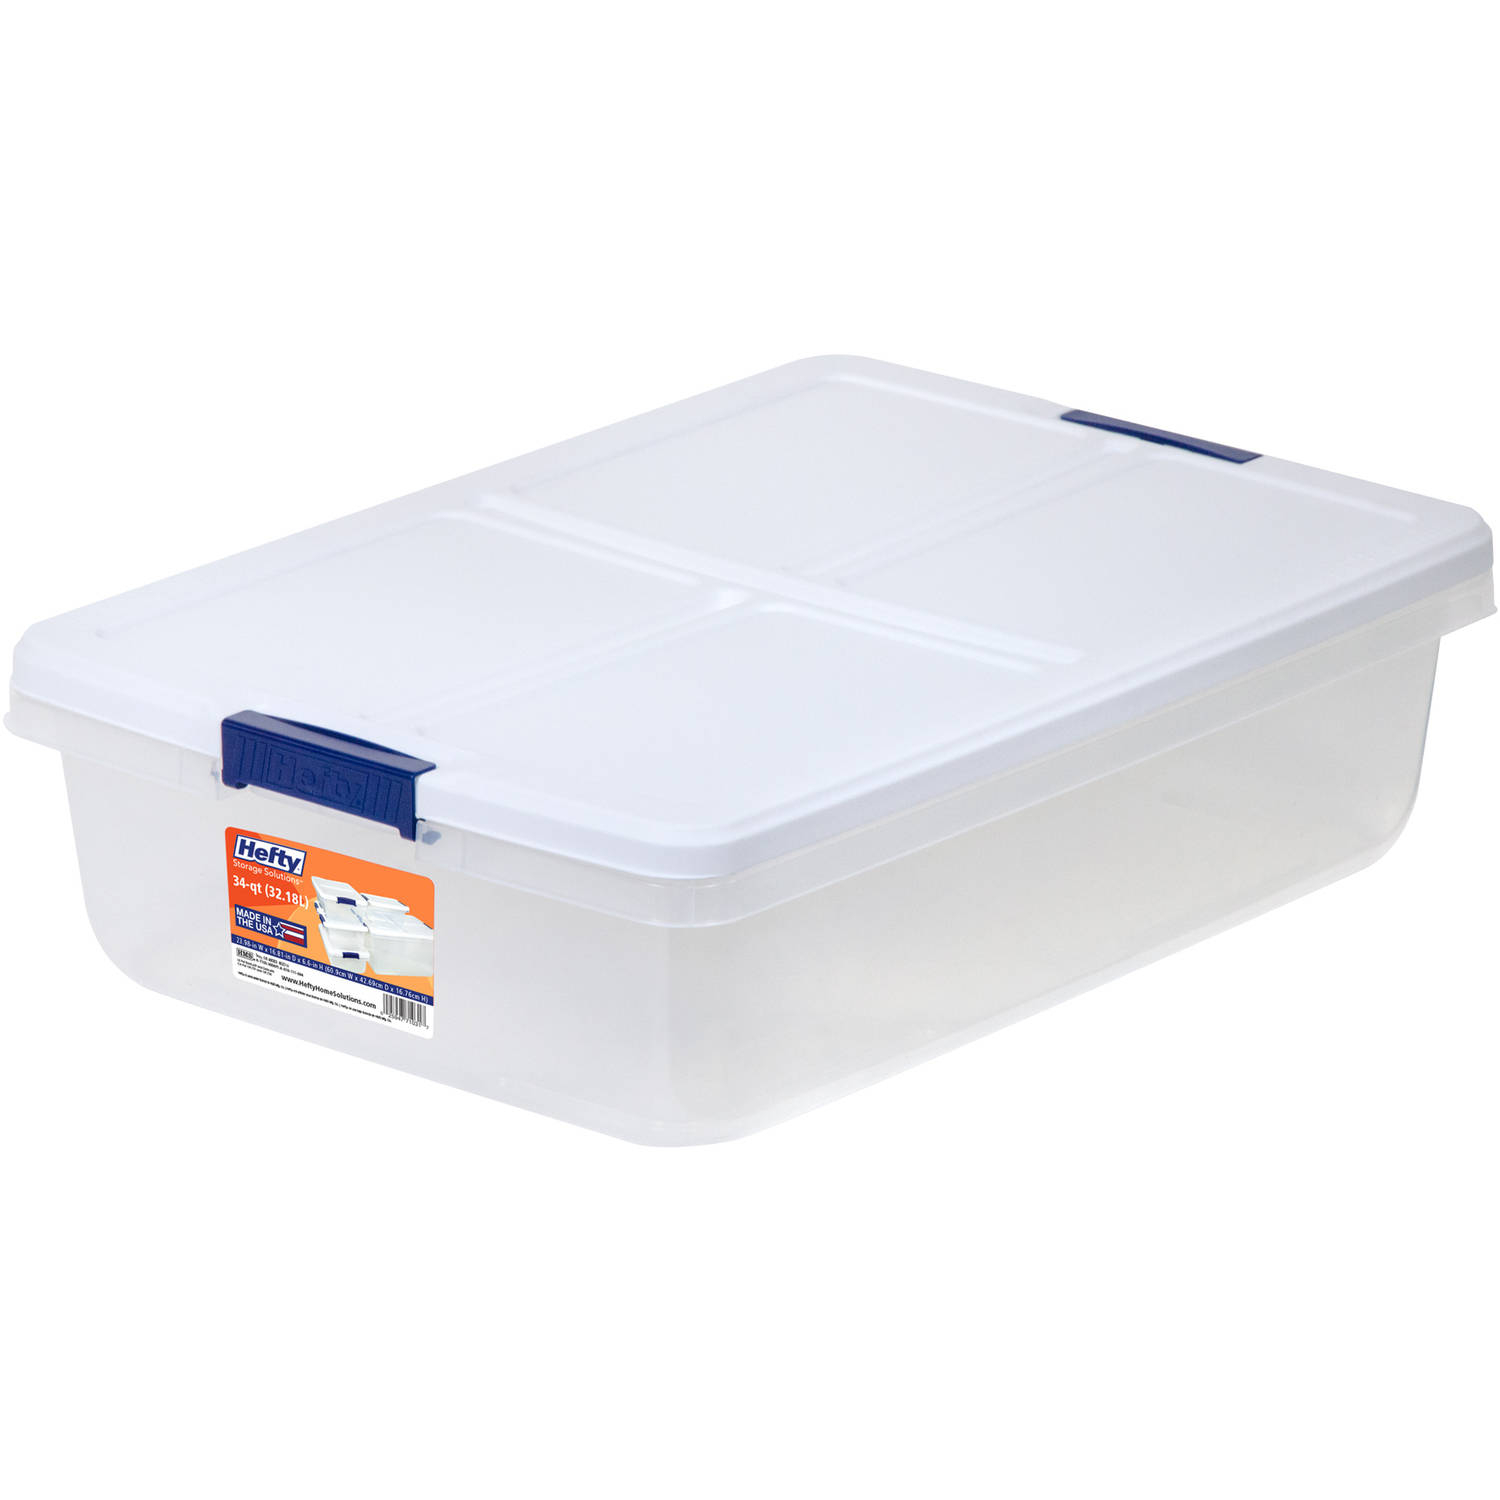 Details About Clear Storage Container 34q Under Bed Latch Handle Box White Lid Stackable Bin pertaining to dimensions 1500 X 1500